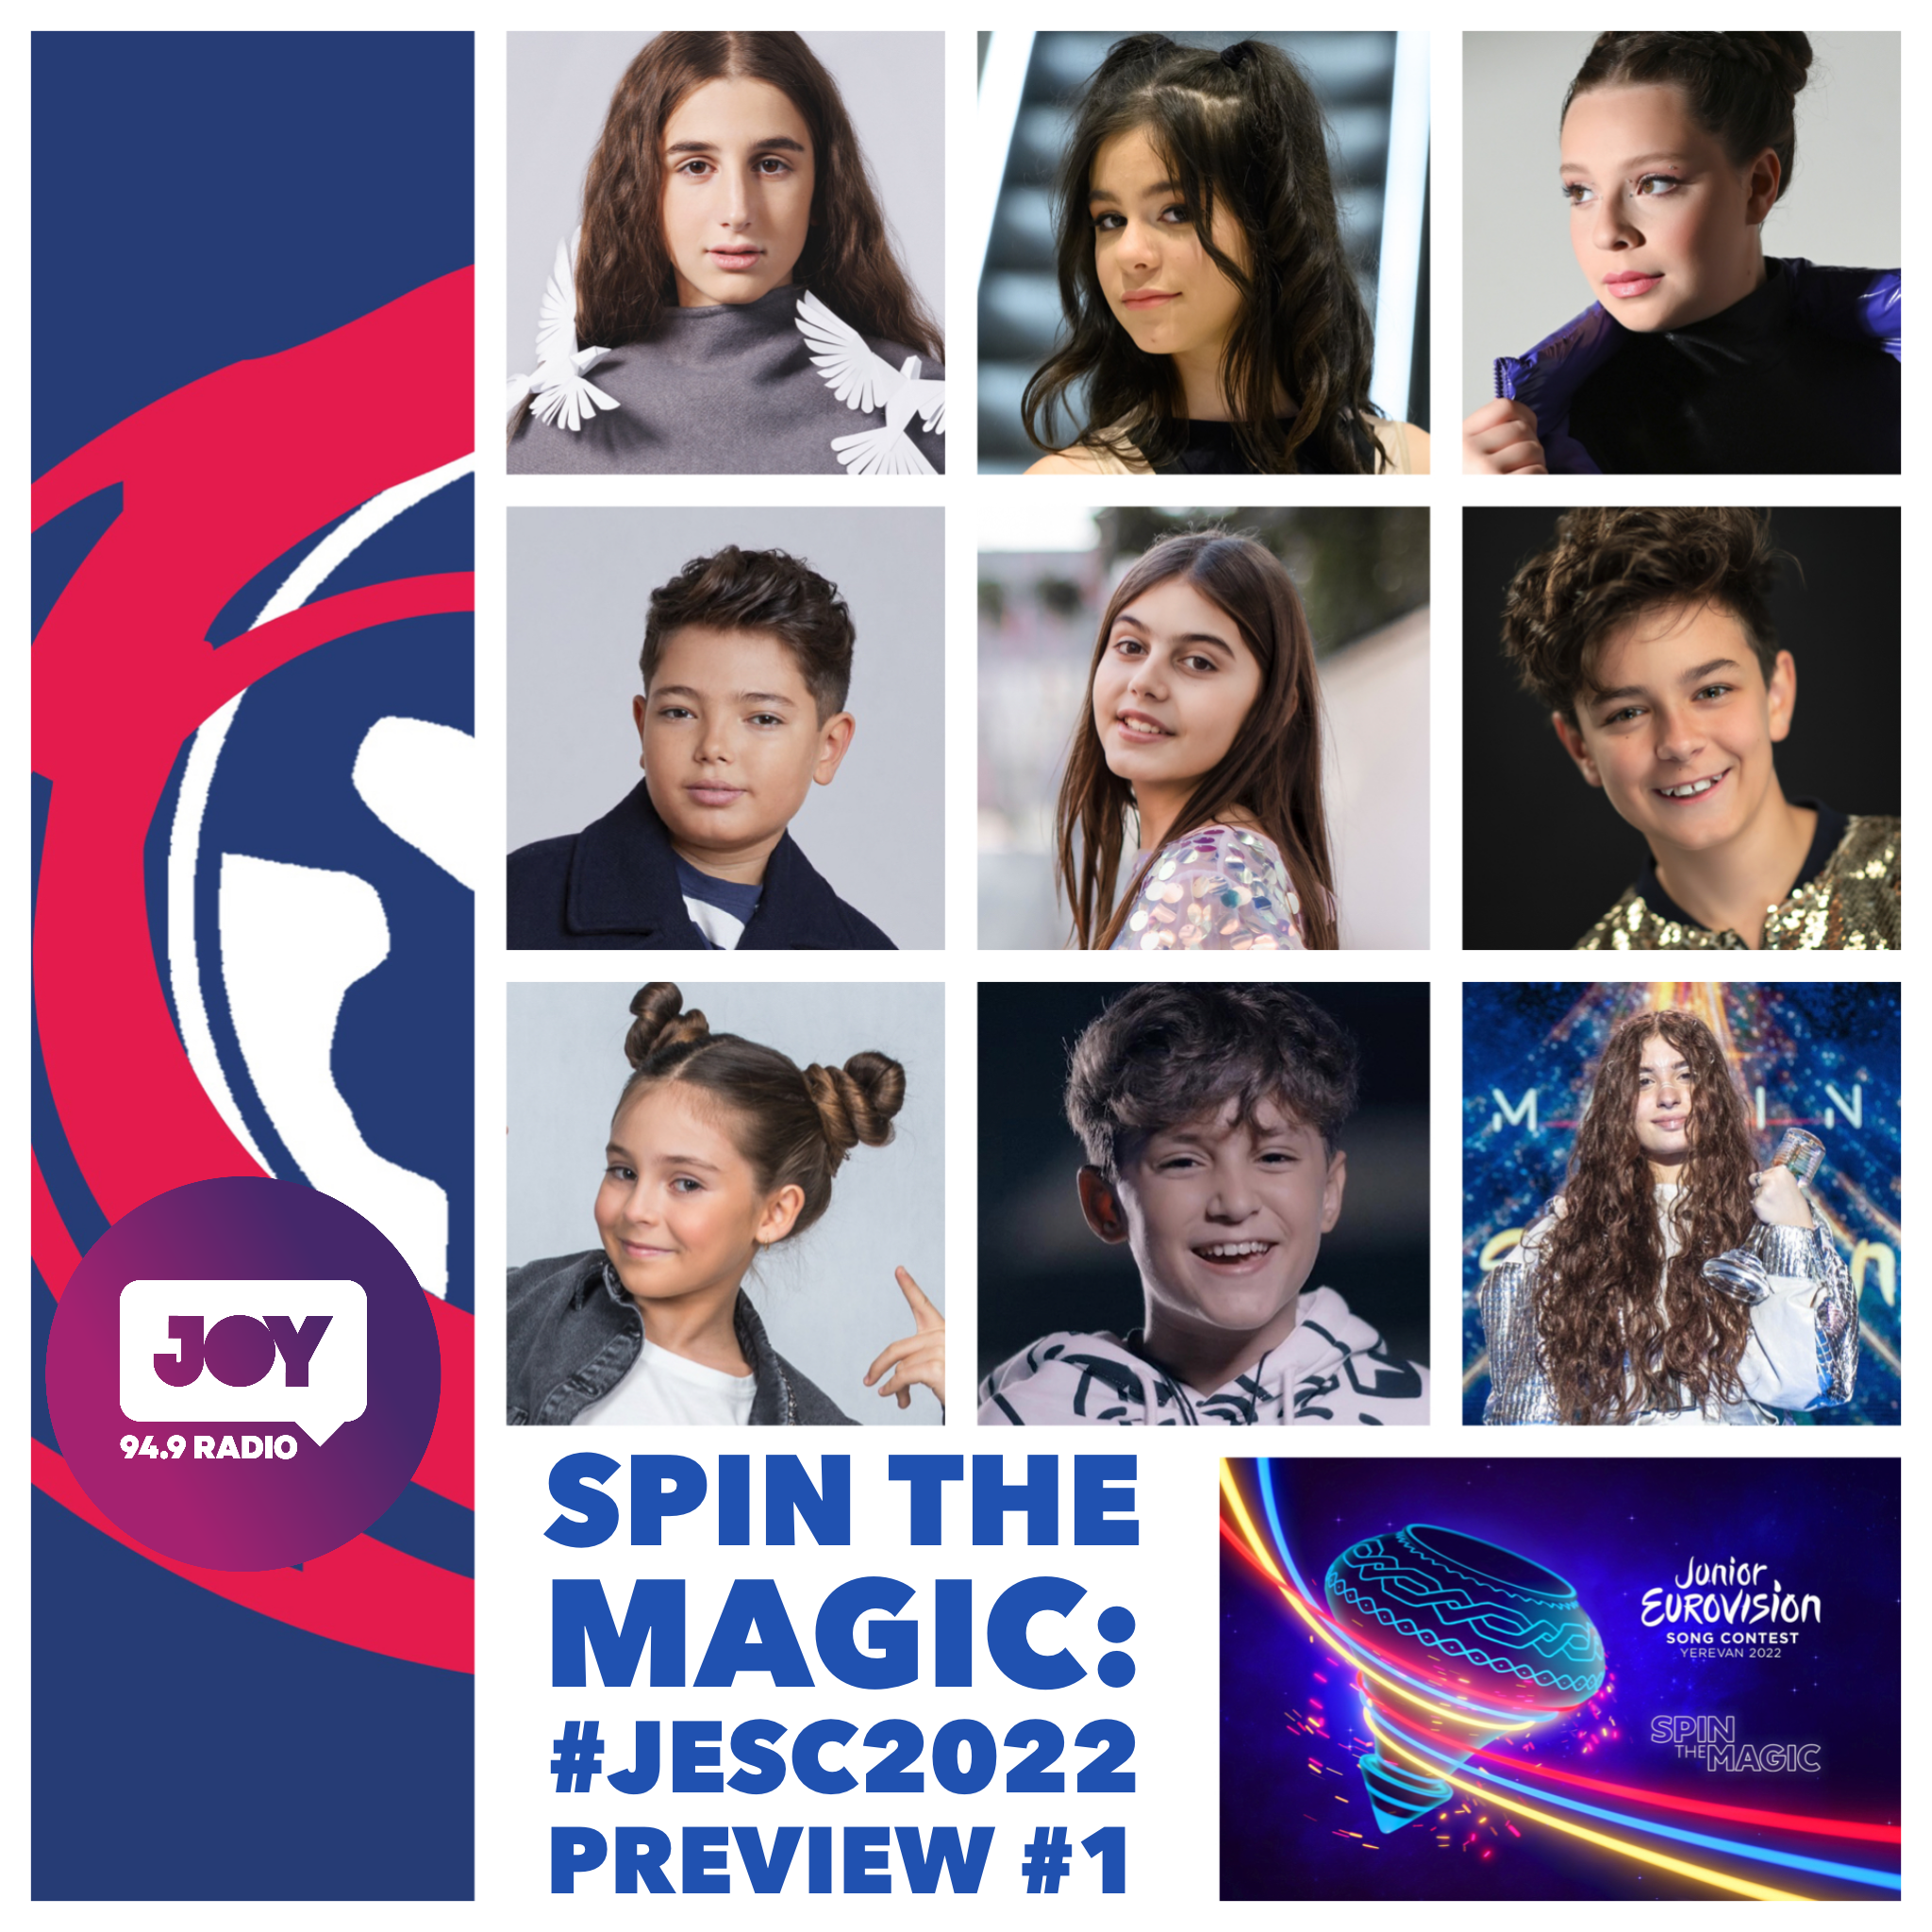 Three hundred and six – Spin the first preview of the 2022 Junior Eurovision Song Contest